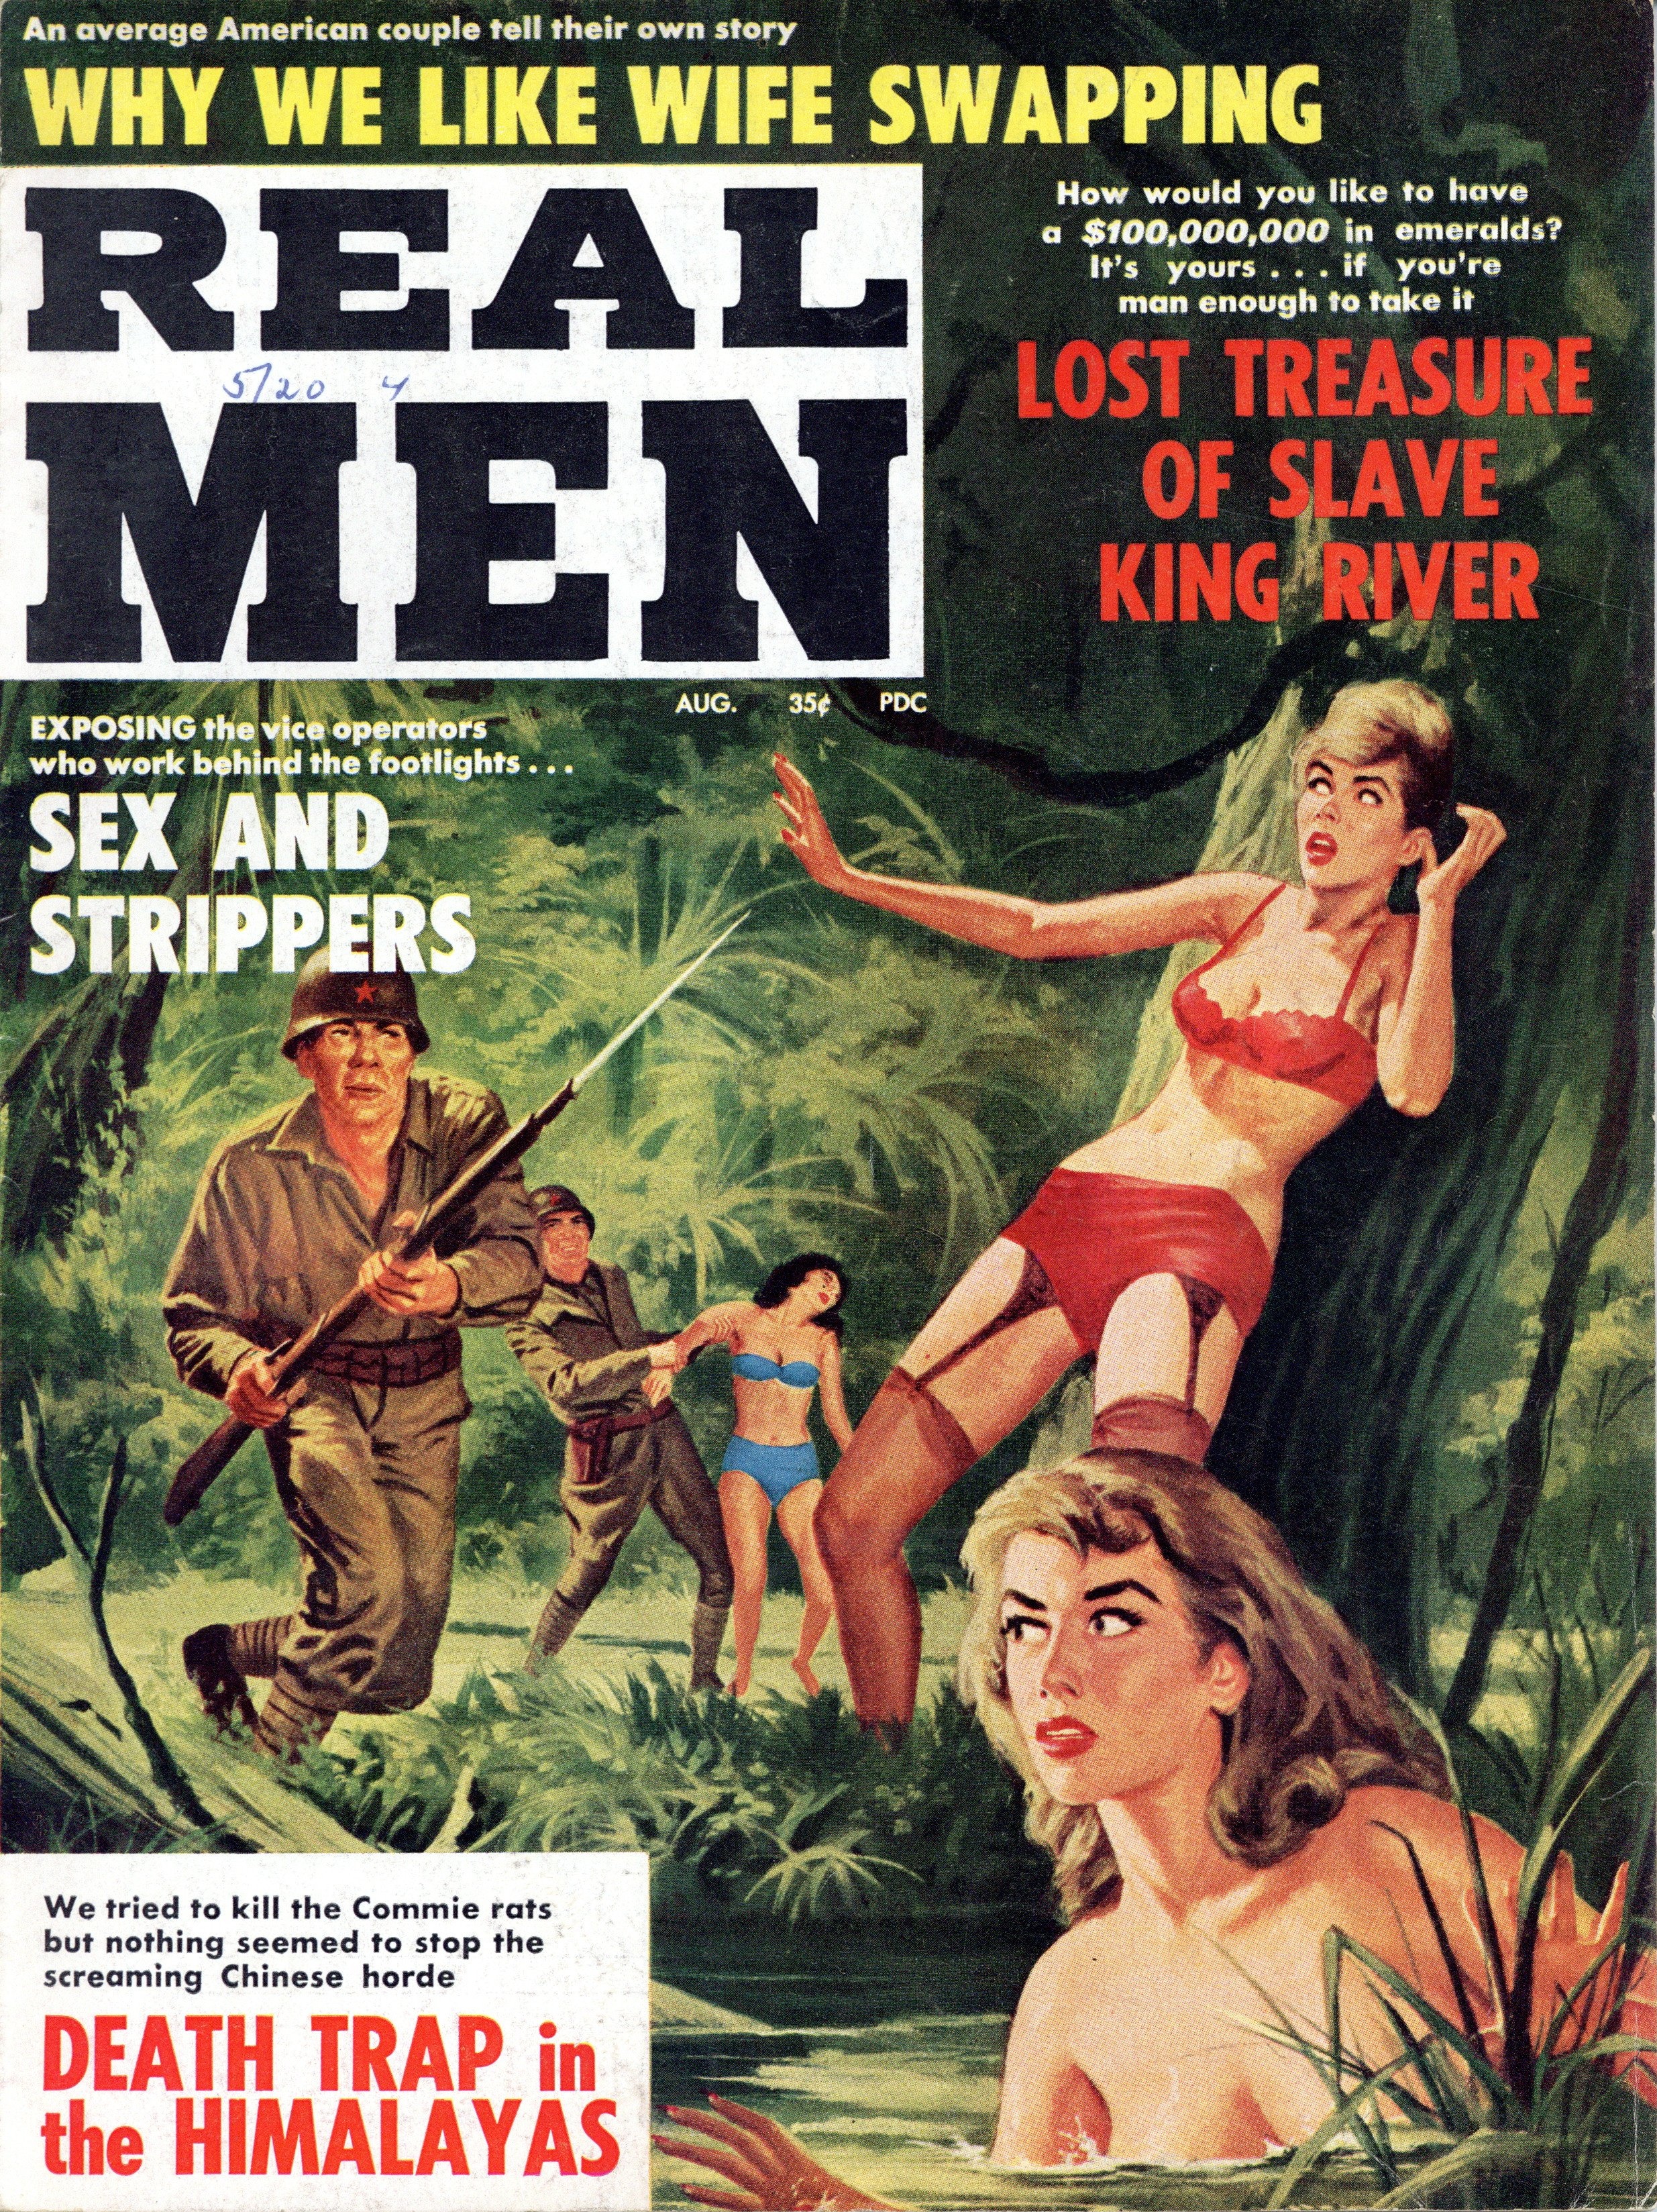 Lost Treasure Of Slave King River -- Pulp Covers pic